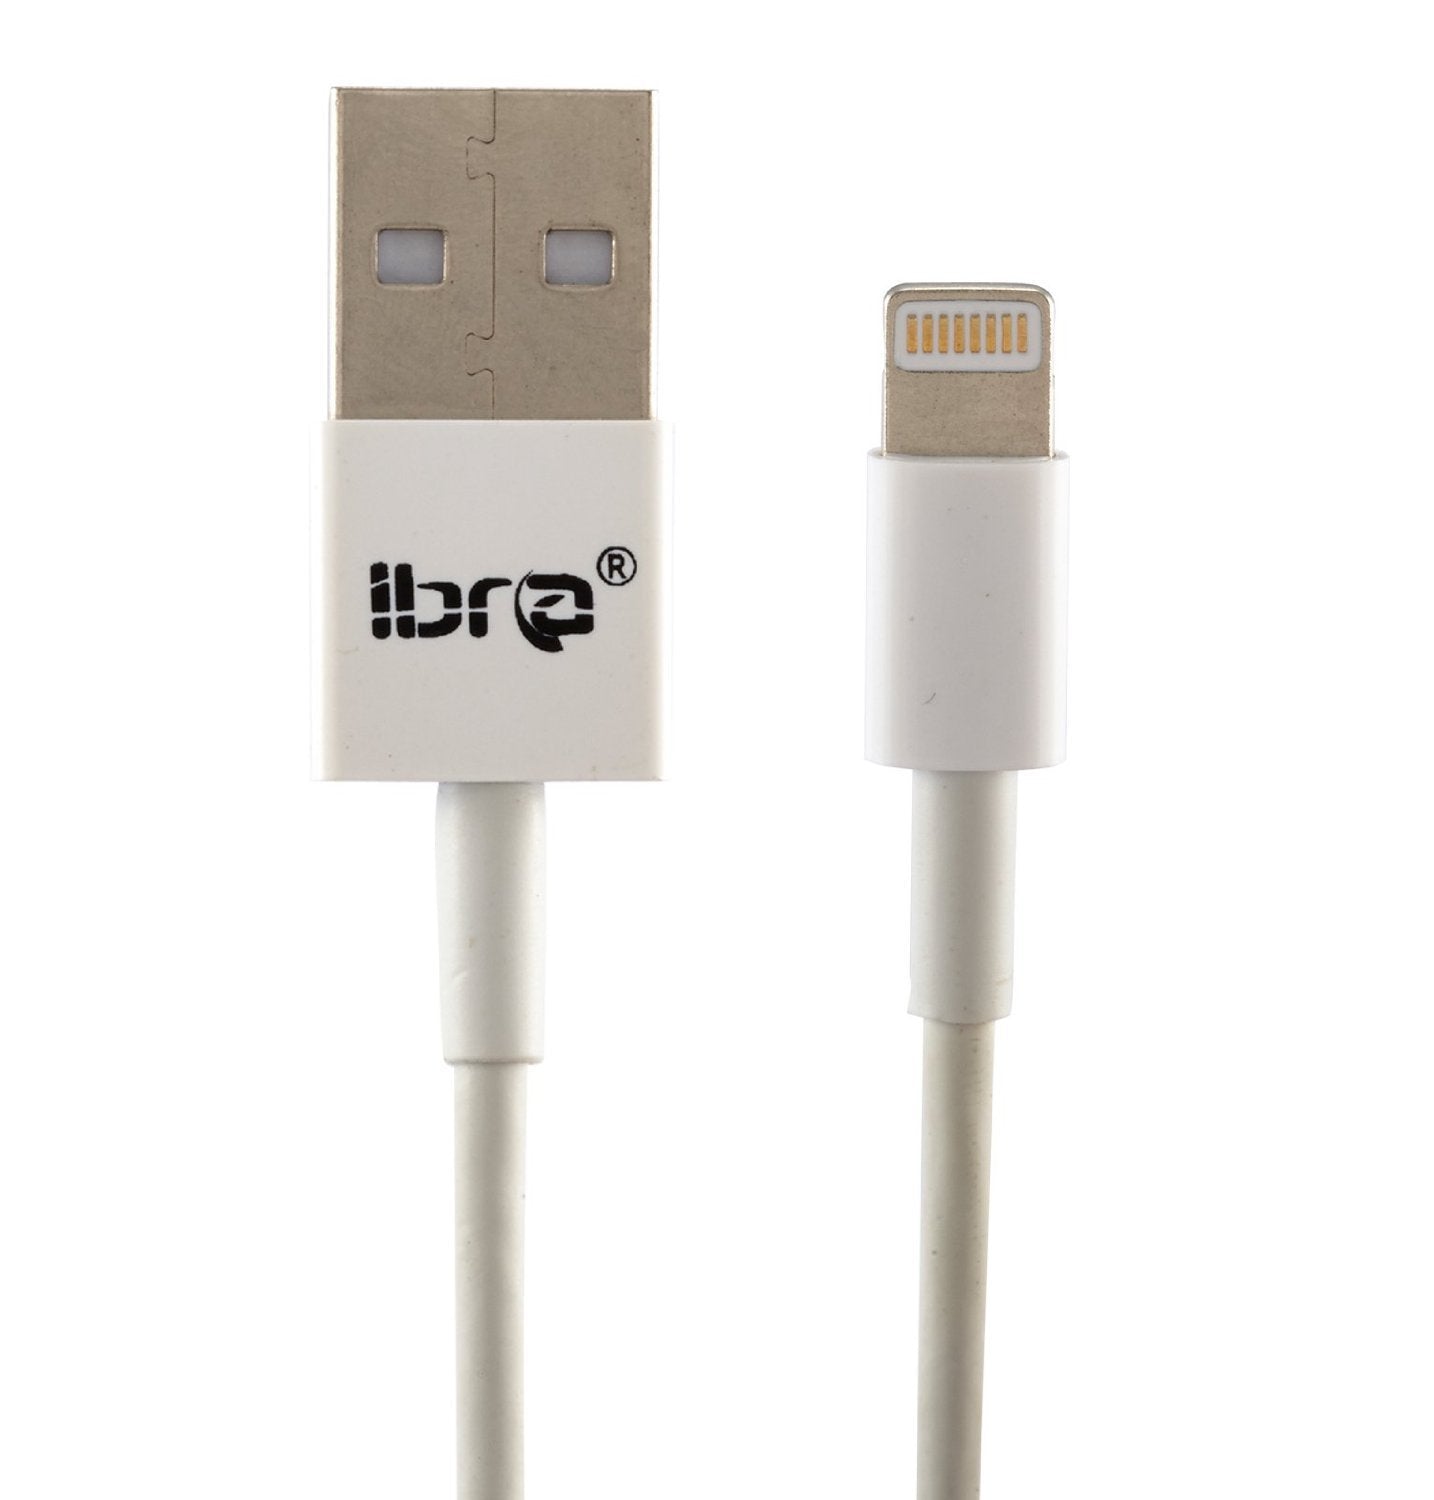 IBRA Lightning to USB Cable with 3M for iPhone 6 6Plus 5s 5c 5, iPad Air Air2 mini mini2 mini3, iPad 4th Gen, iPod touch 5th Gen, and iPod nano 7th Gen [WHITE]